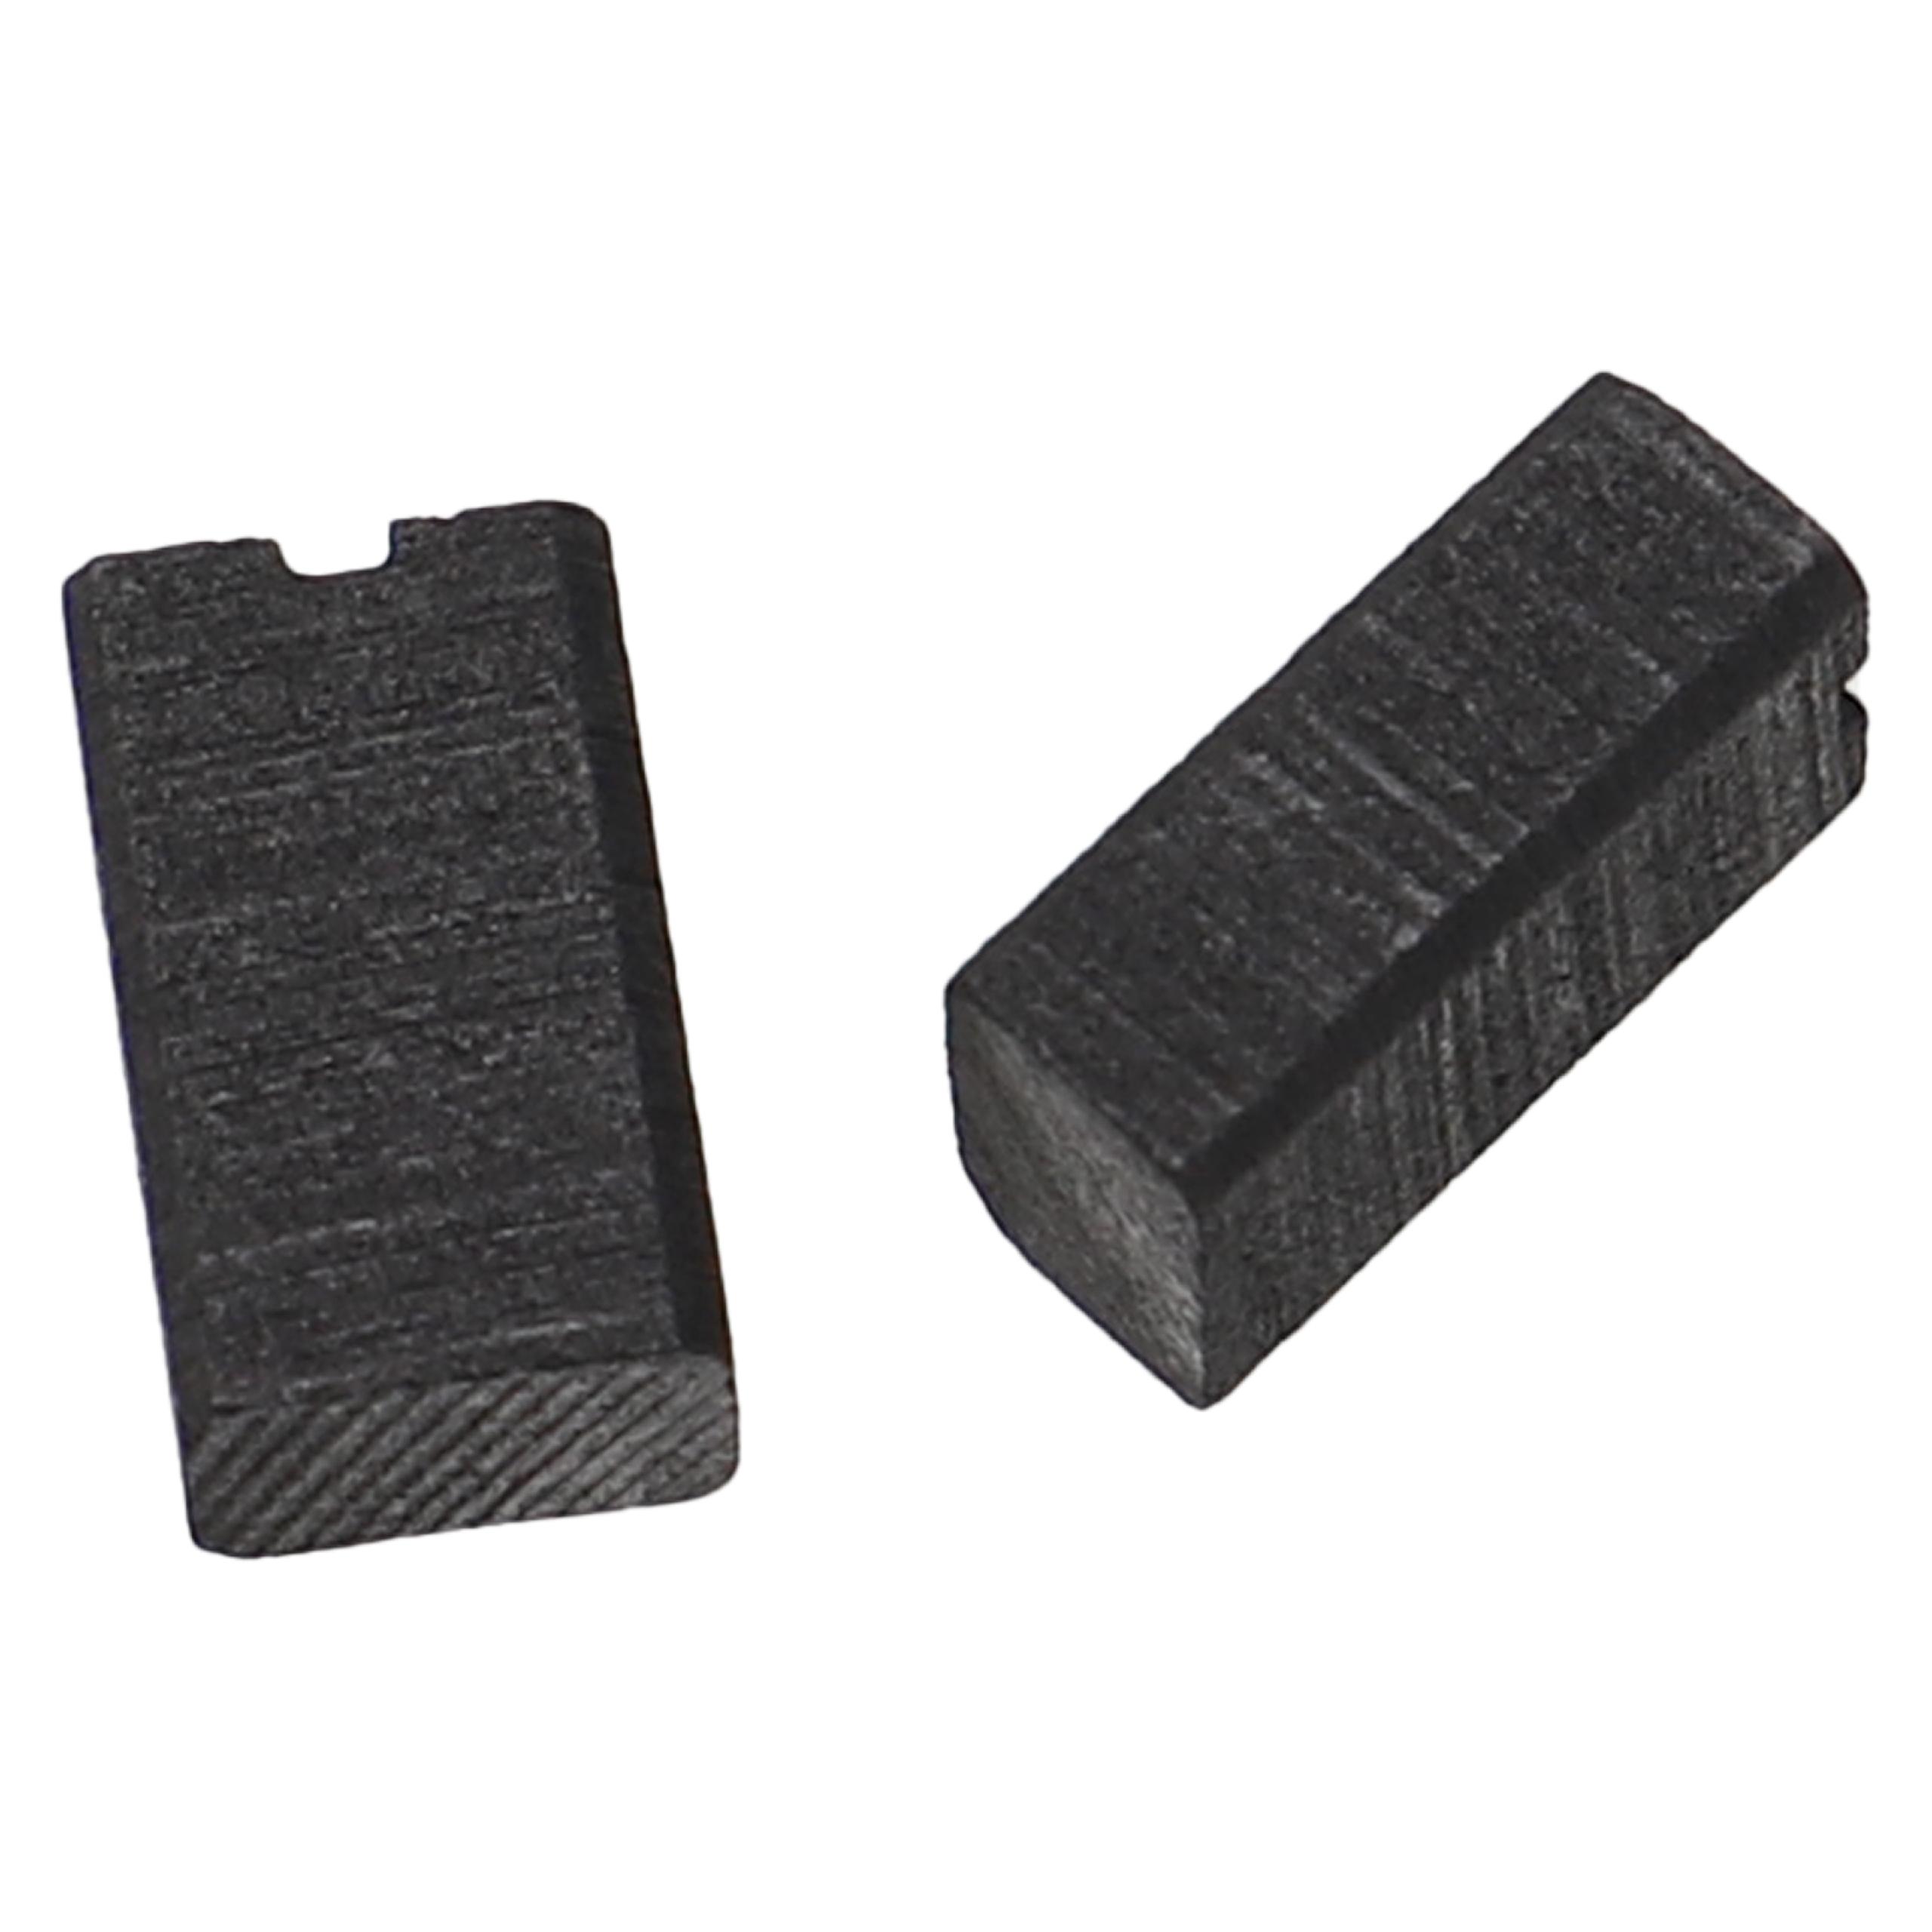 2x Carbon Brush for coffee machine